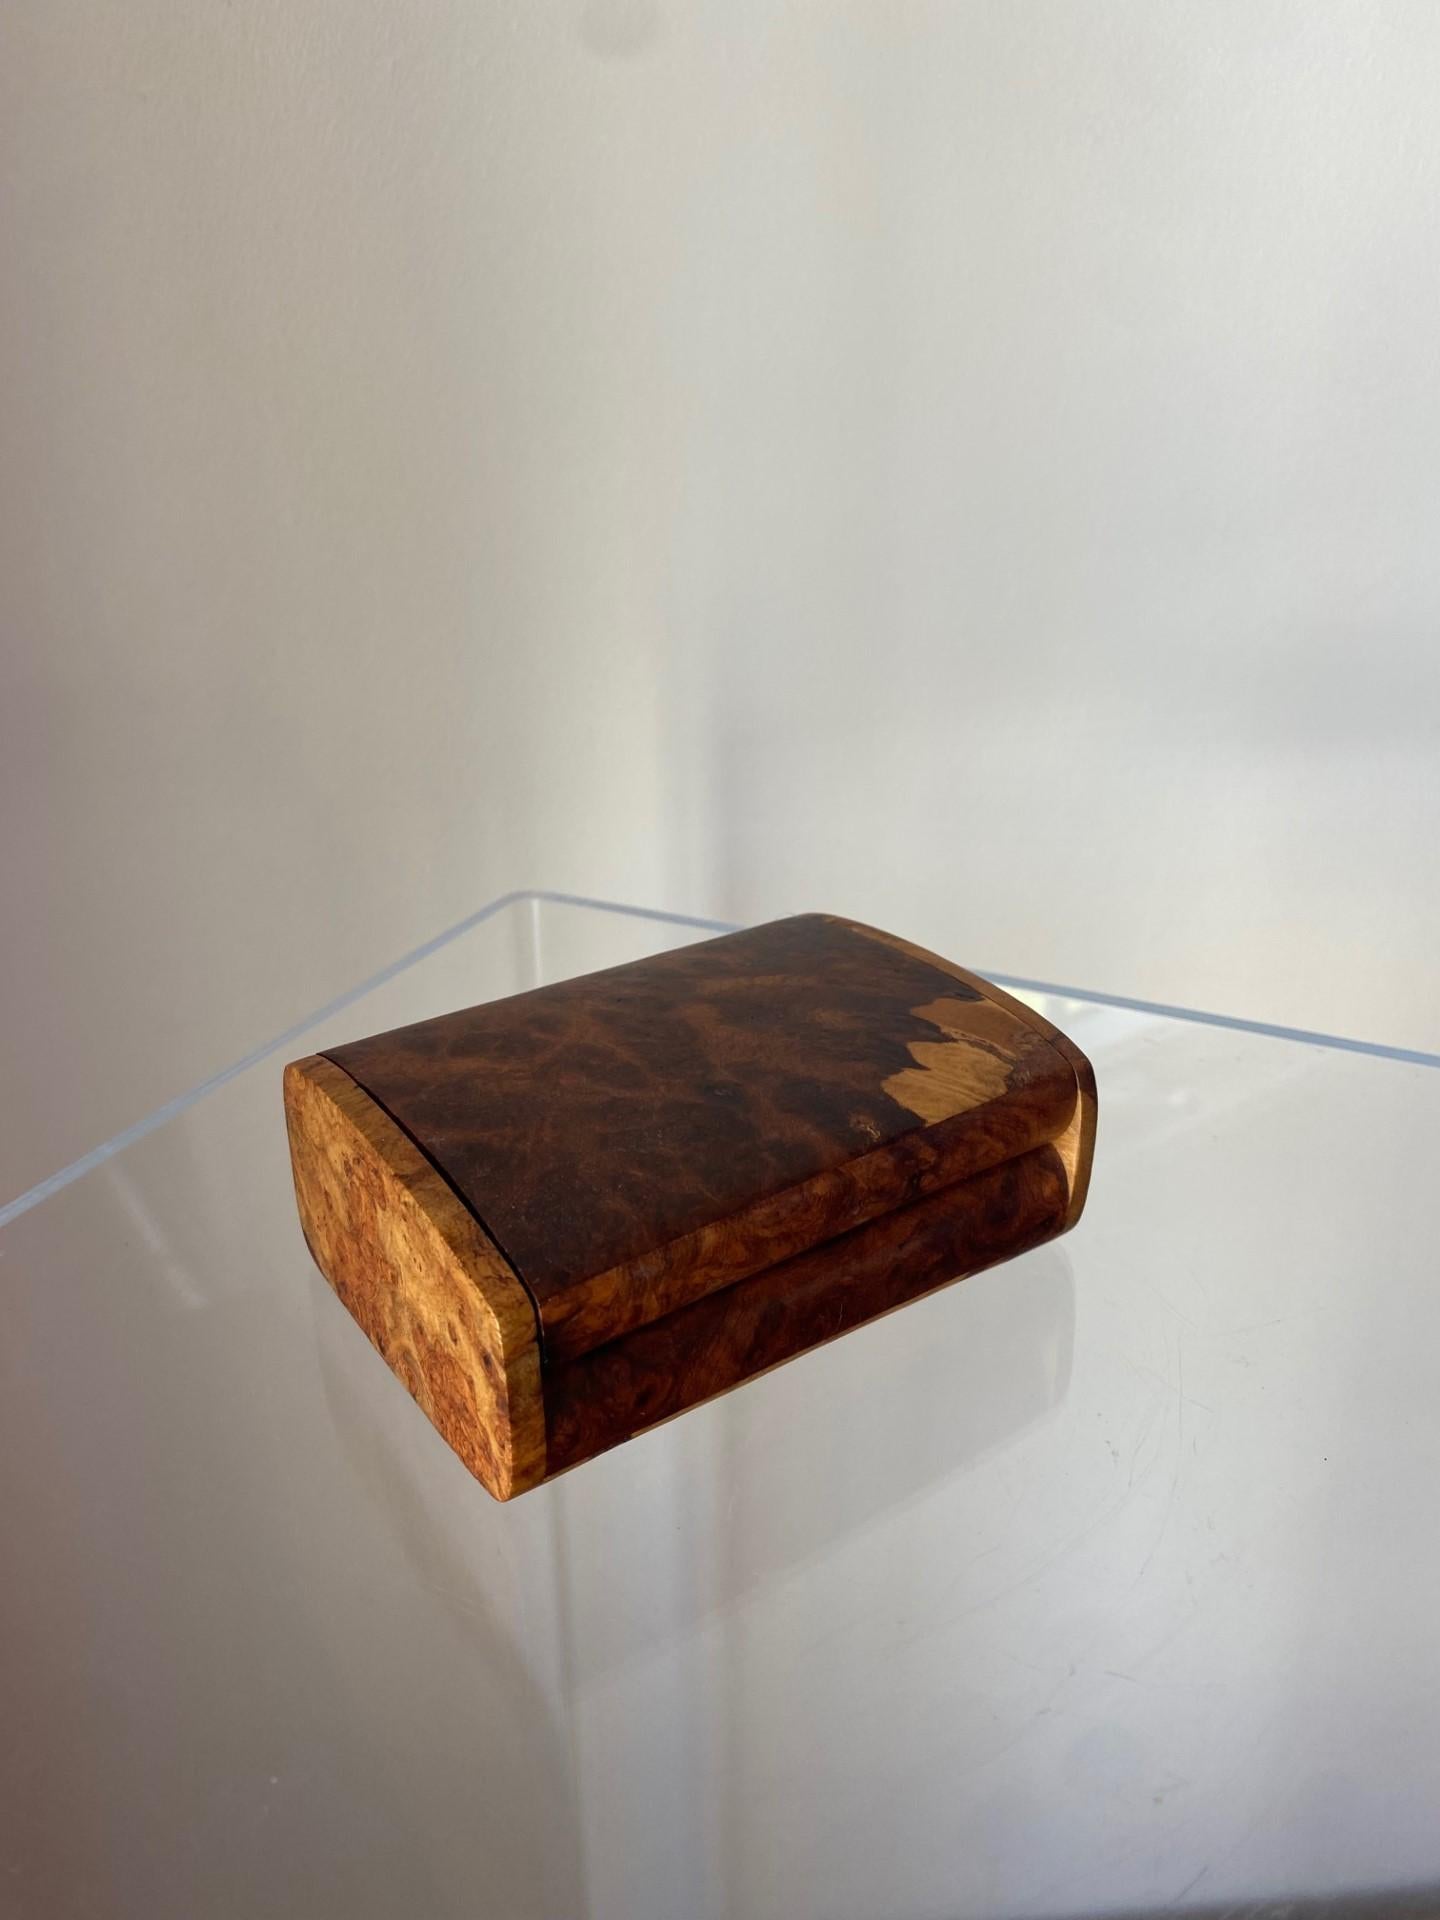 An unusual and streamlined burl wood trinket box, circa 1990s. The box has a movable lid and is in great vintage condition.  Incredibly beautiful piece that exudes organic modern style with a minimal footprint.

Mid-Century, Hollywood Regency, Art